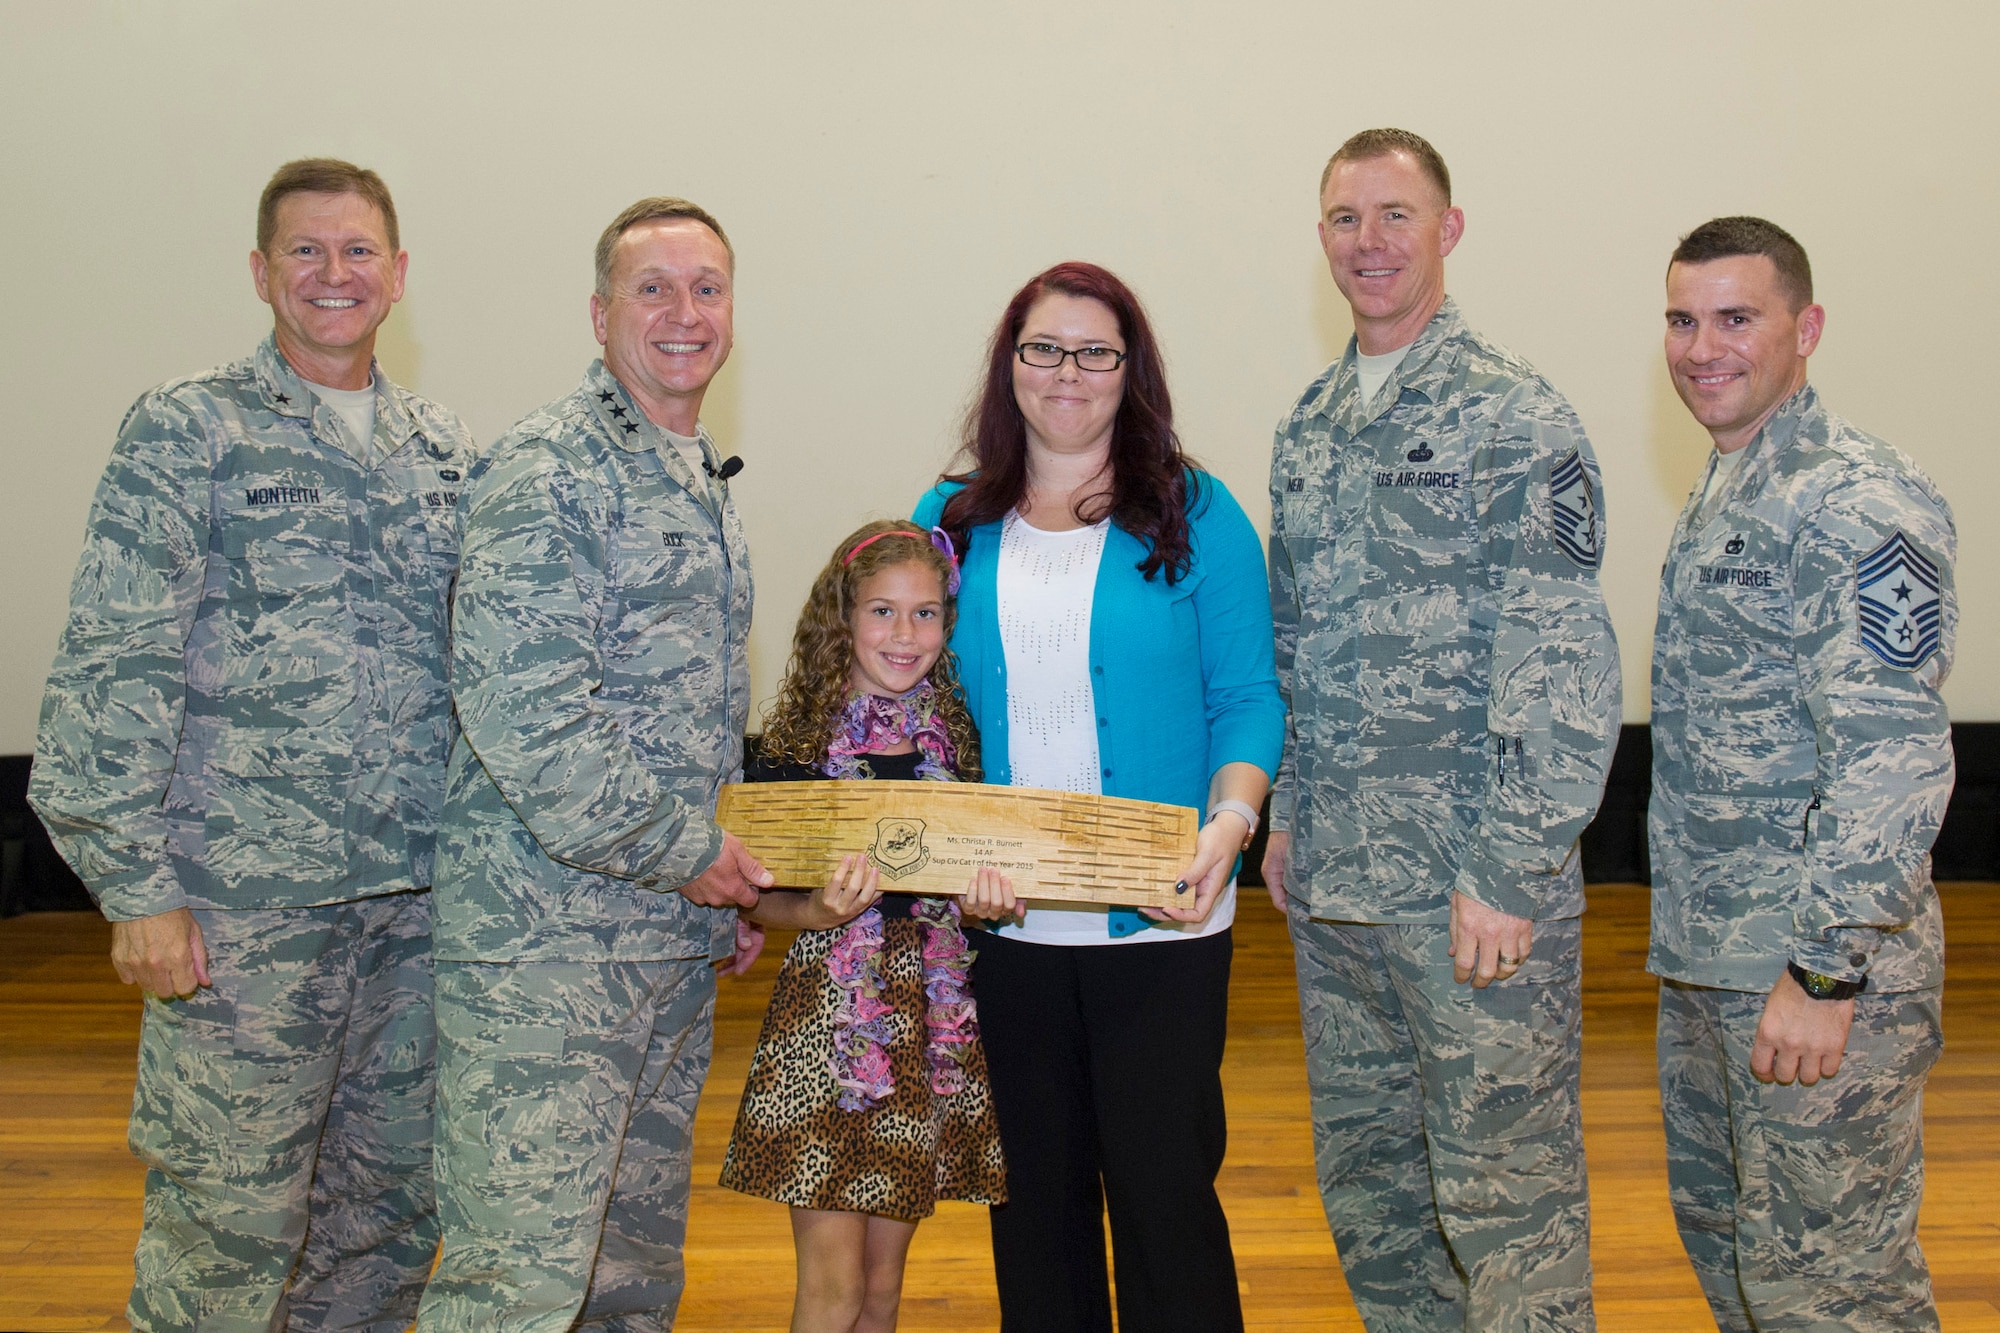 Christa R. Burnet, 45th Force Support Squadron, is presented the 14th Air Force Civilian of the Year, Category I, Supervisor, at an all call hosted by the 14th Air Force commander and command chief May 4, 2016, at Patrick Air Force Base, Florida. During the all call, Lt. Gen. David J. Buck, commander, 14th Air Force (Air Forces Strategic), Air Force Space Command; and commander, Joint Functional Component Command for Space, U.S. Strategic Command, and Chief Master Sgt. Craig Neri, 14th AF command chief and command senior enlisted leader for JFCC Space, touched on what it takes to be a good Airman and presented several awards. (U.S. Air Force photo by Matthew Jurgens/Released)